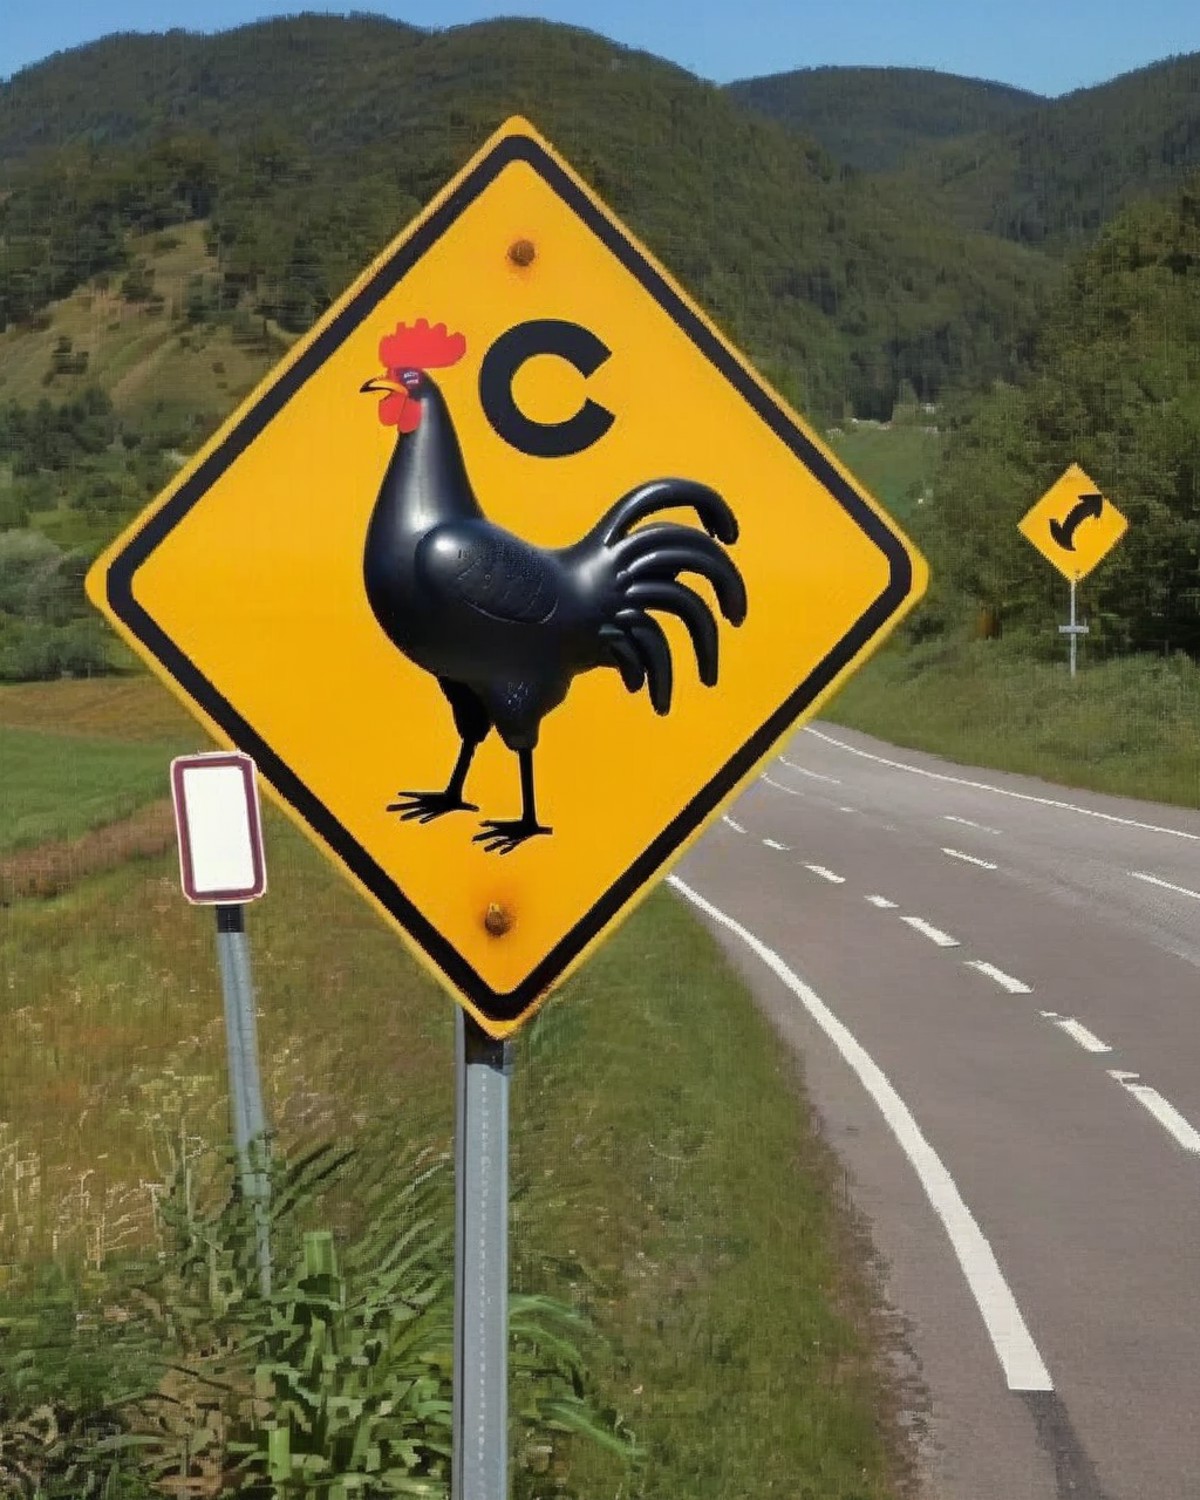 a photo of a road sign , Caution: Giant Rubber Chicken Crossing:1.5, a humorous sign suggesting the potential for encounte...